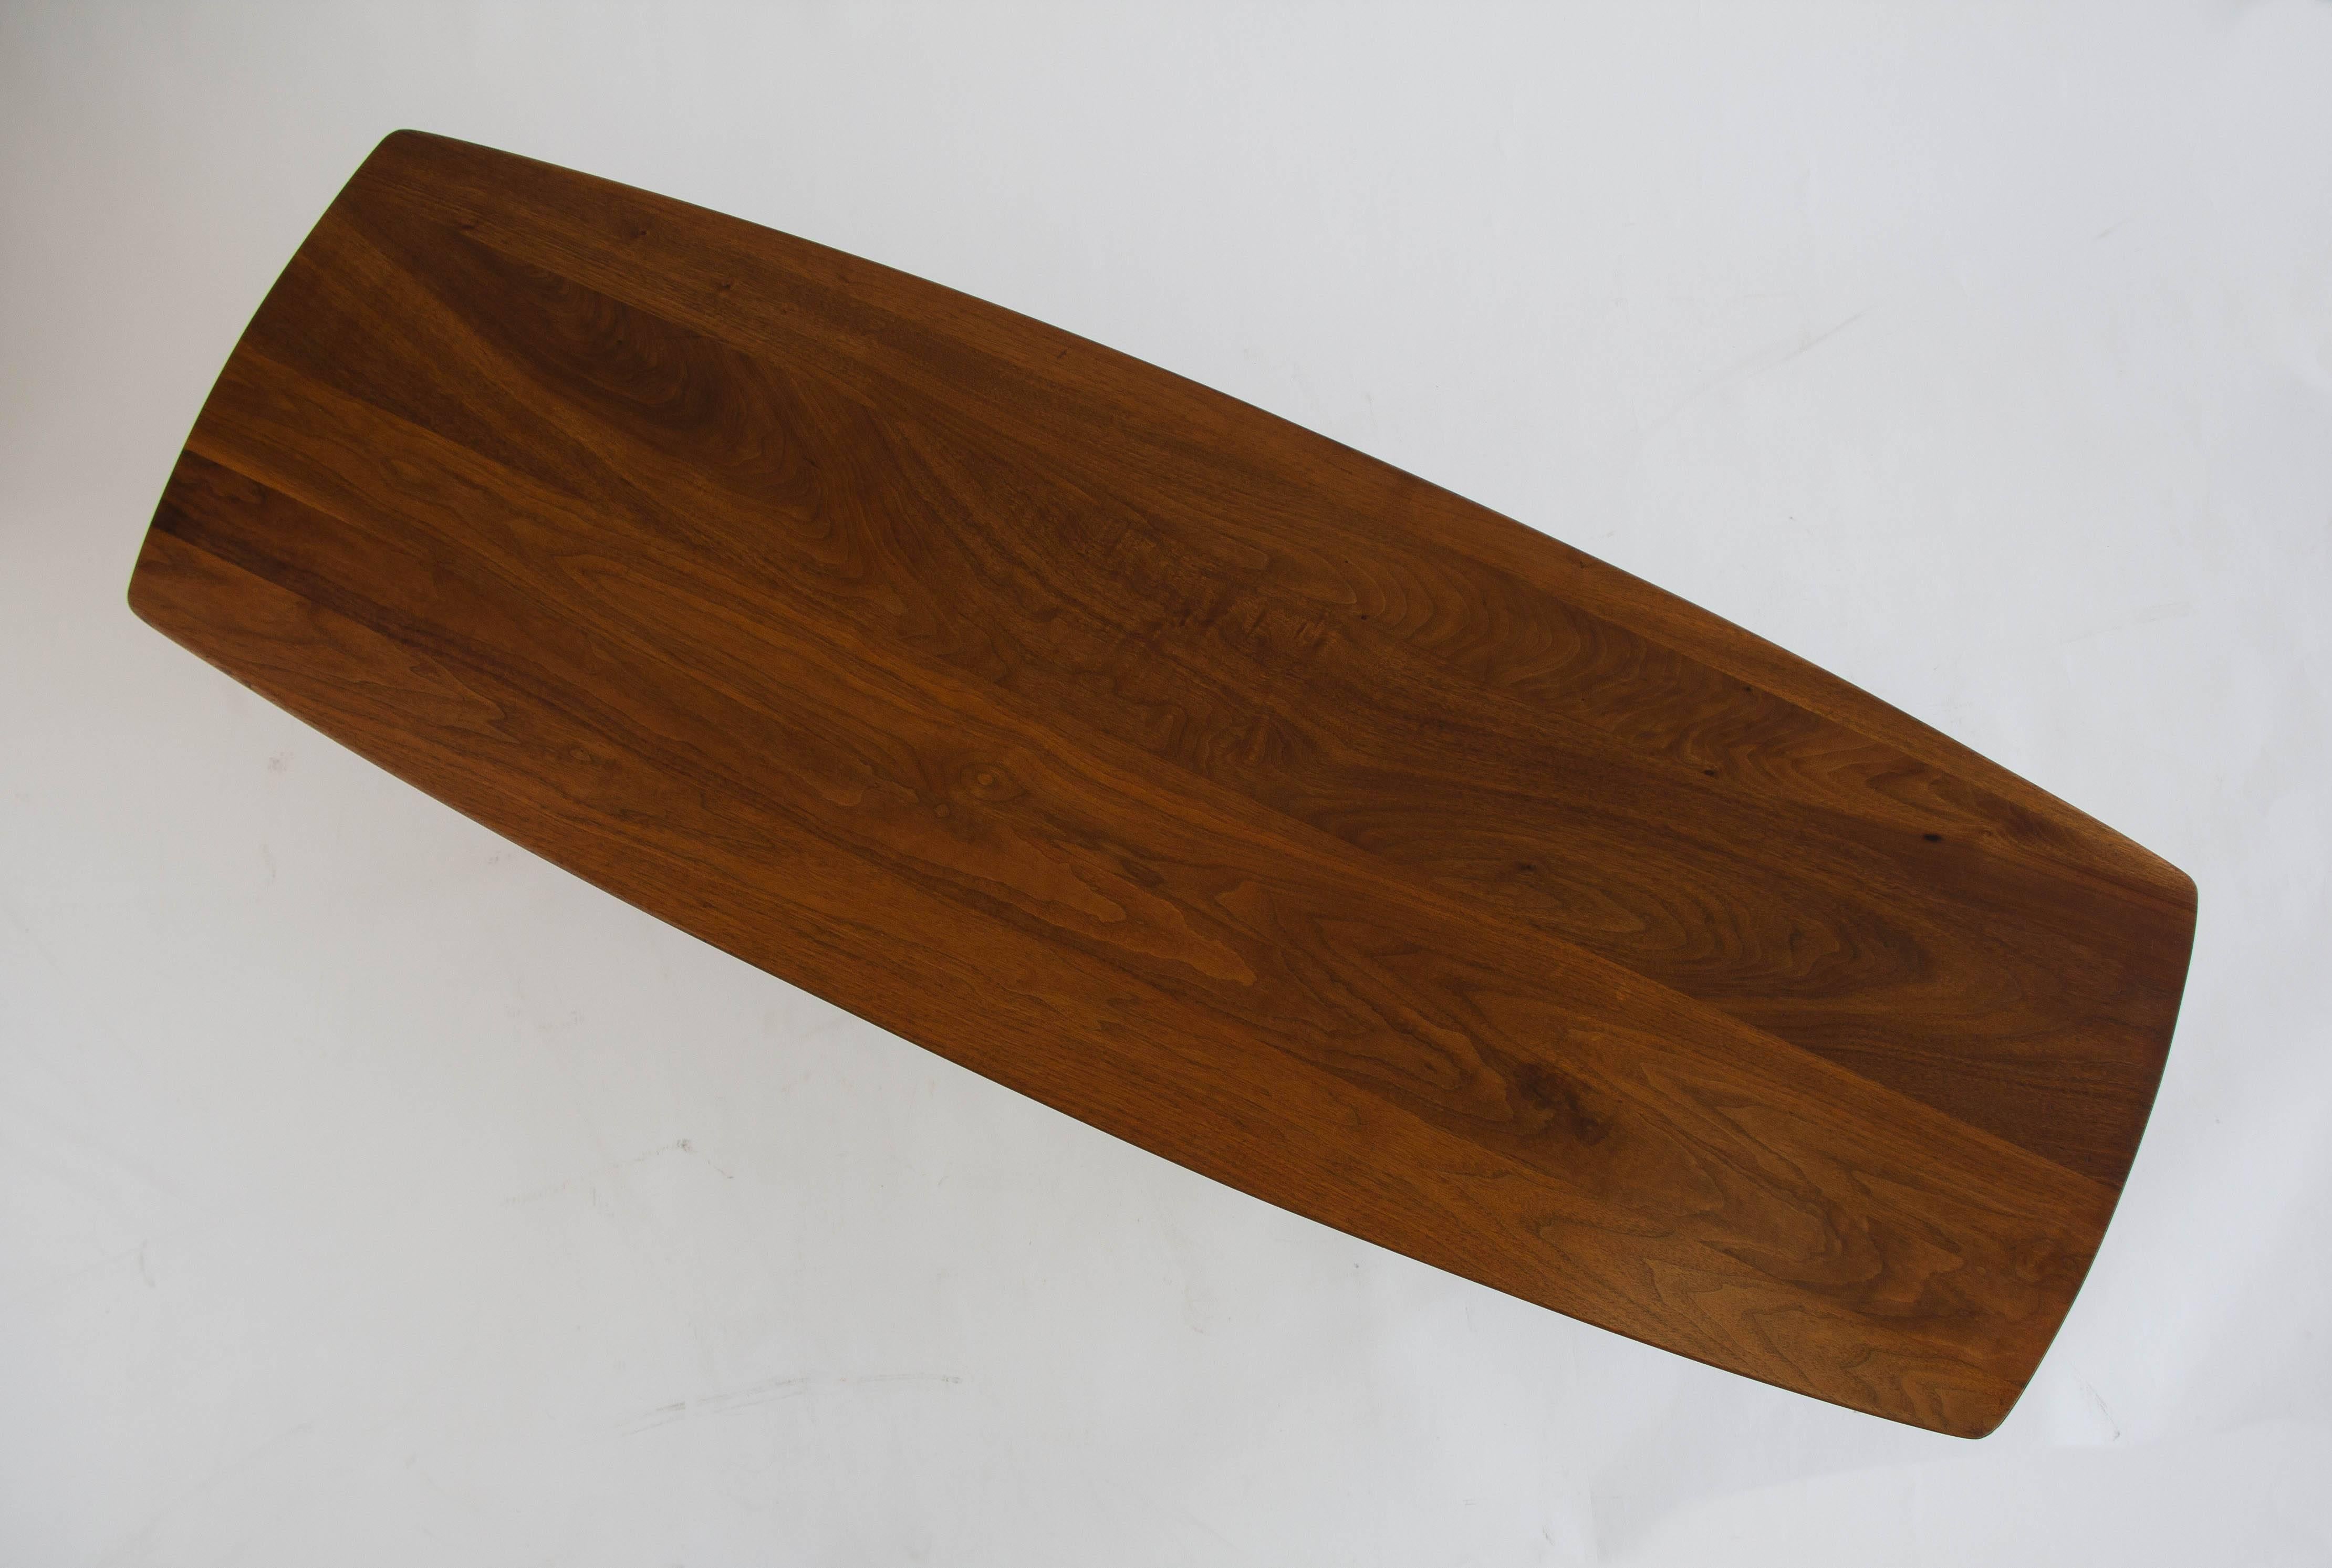 Oiled American Made Solid Walnut Surfboard Coffee Table by Prelude